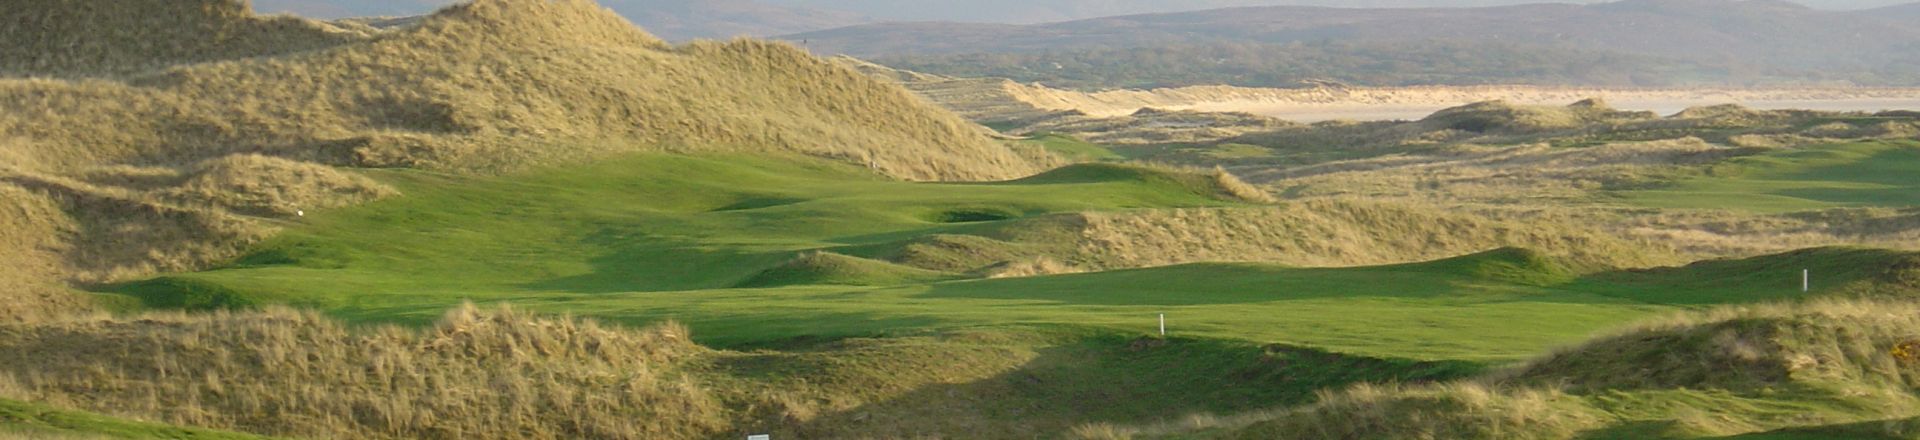 Immerse yourself in the breathtaking landscape of Sandy Hills Links at Rosapenna Golf Resort. A pristine golf course surrounded by rolling green hills showcasing natural beauty and challenging play.